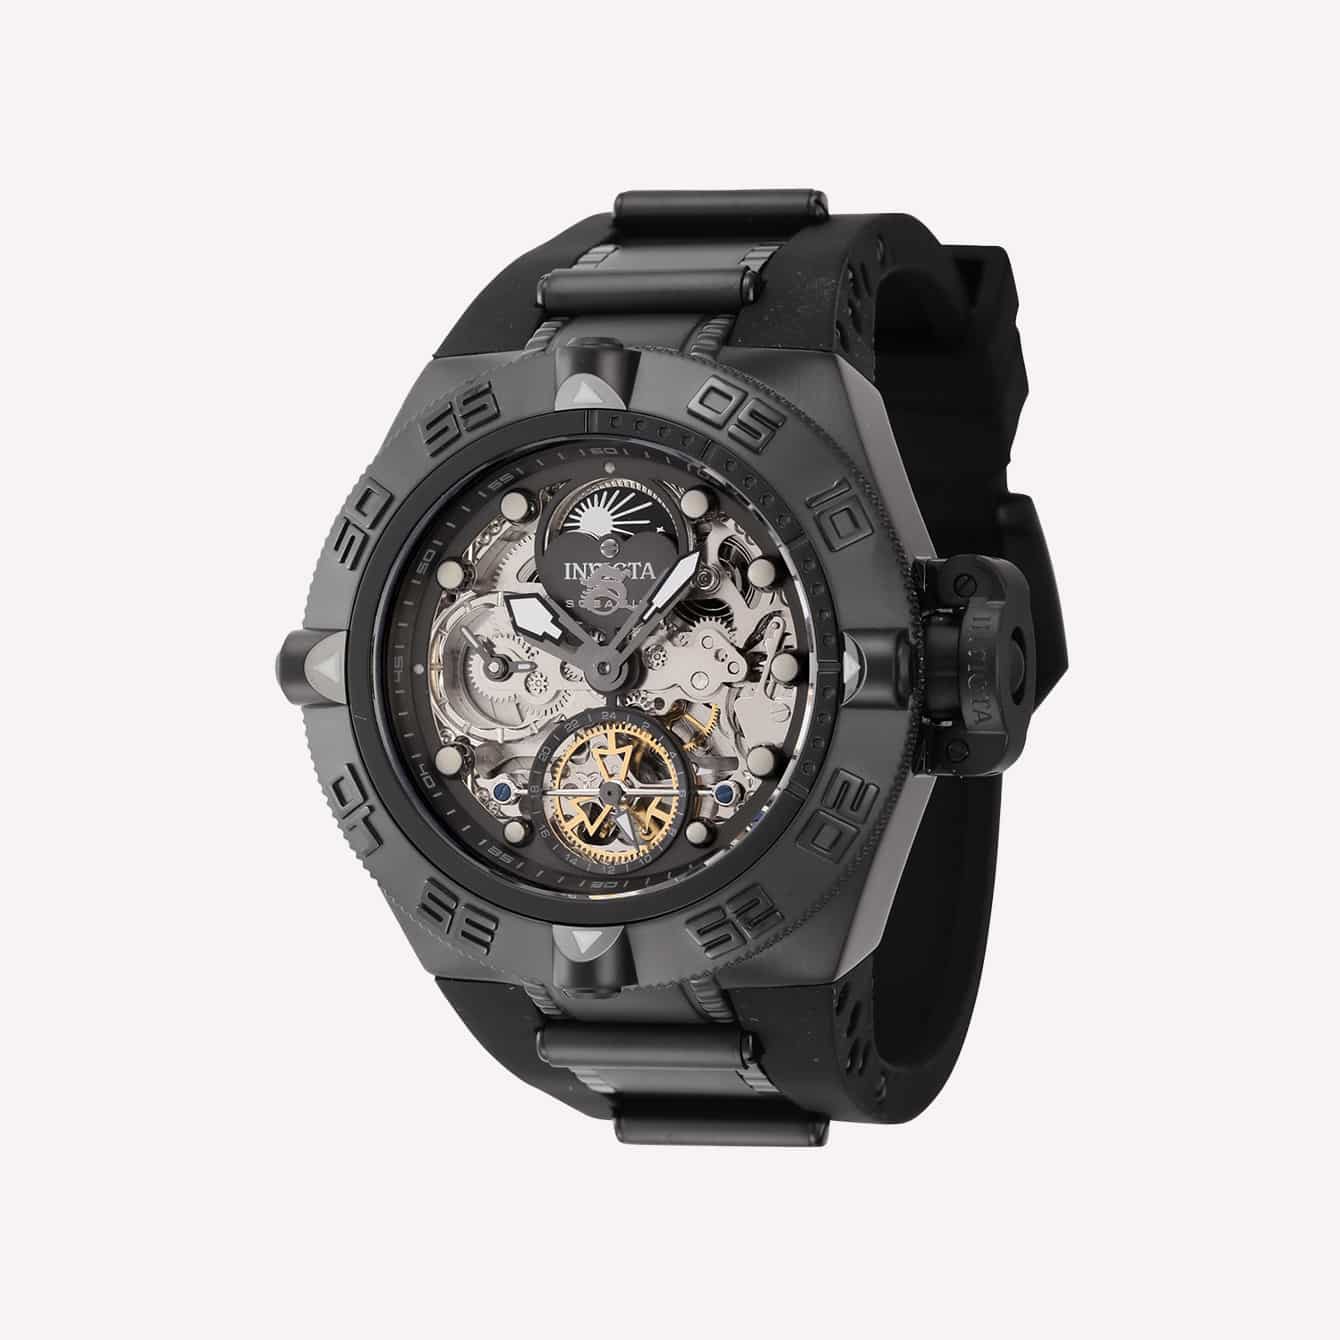 12 Best Invicta Watches (Invicta Watch Buying Guide)-10